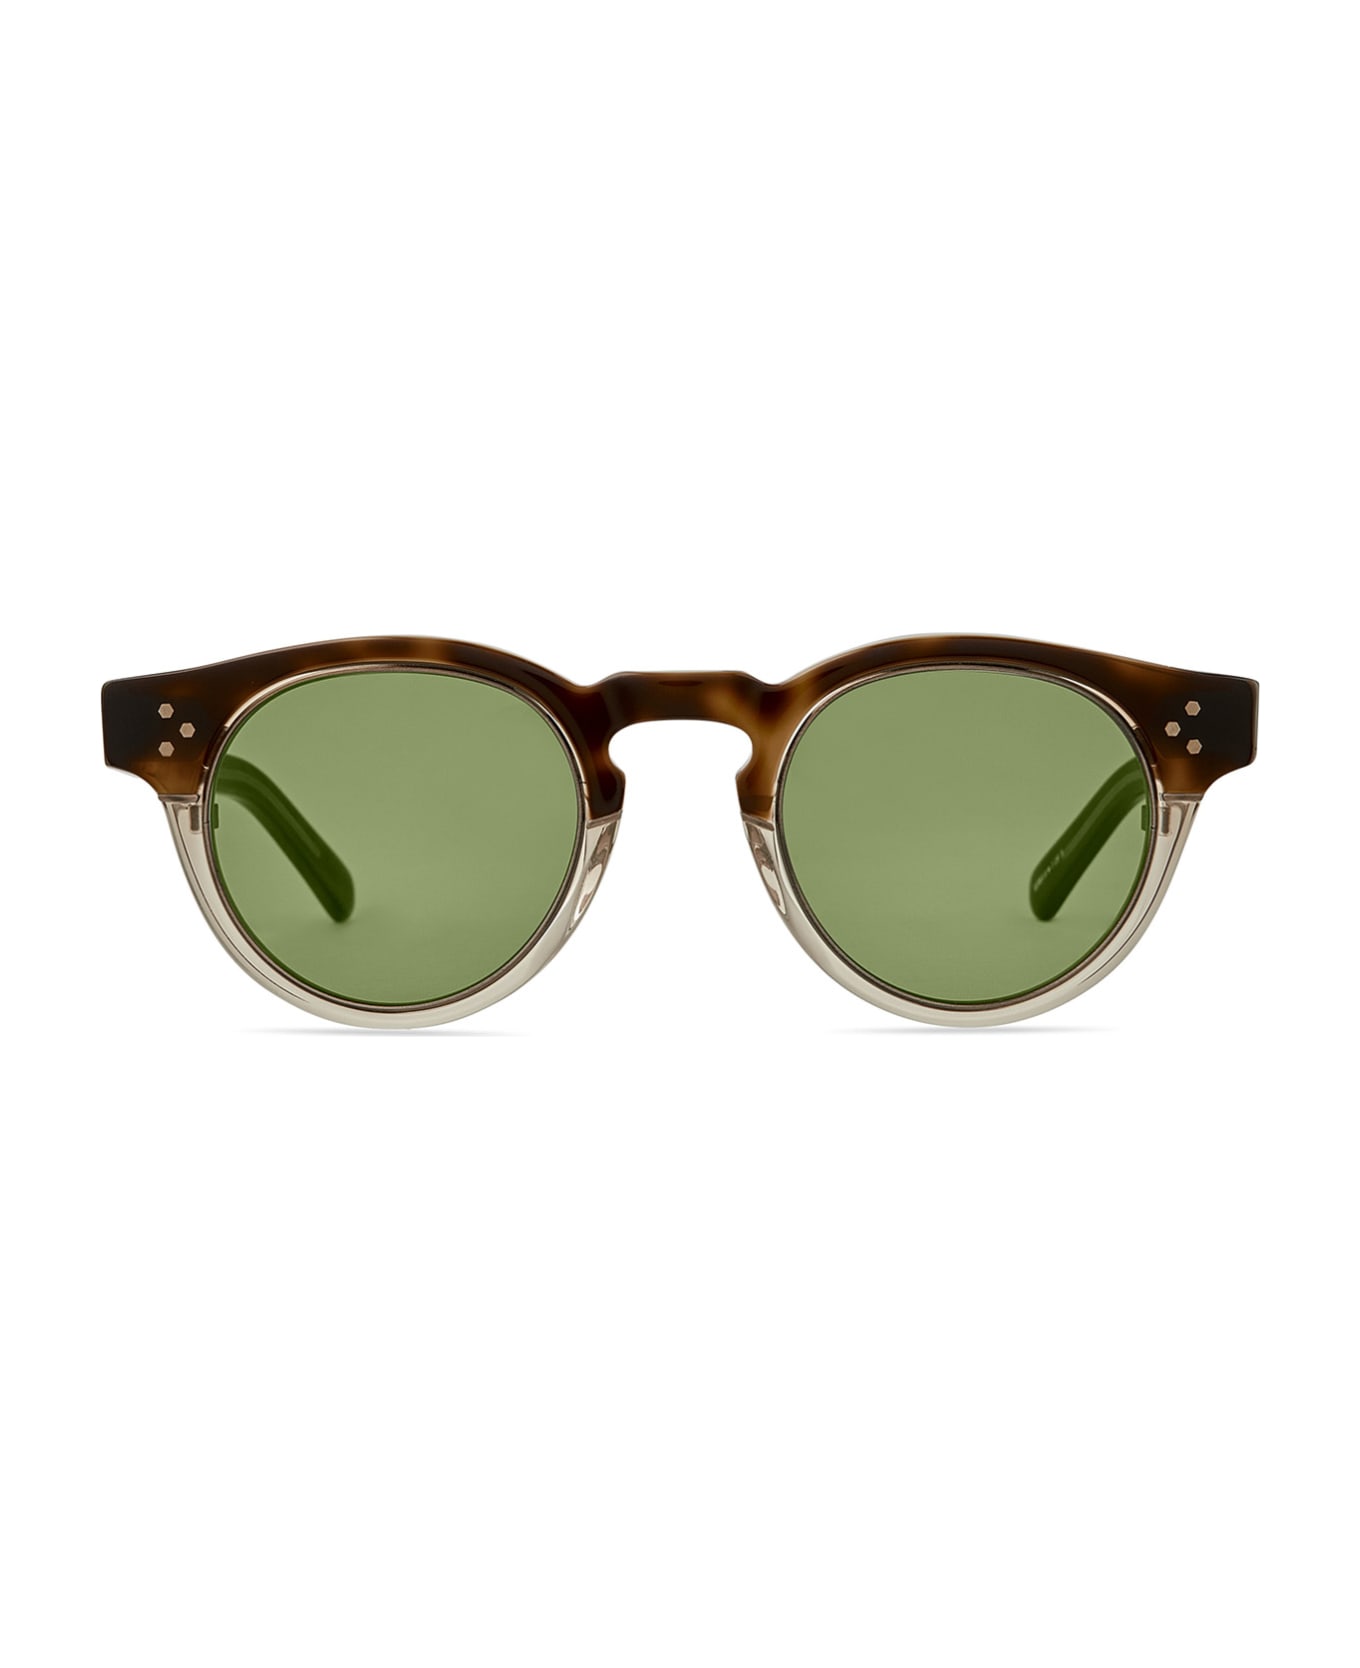 Mr. Leight Kennedy S Honeycomb Laminate-antique Gold/green Sunglasses - Honeycomb Laminate-Antique Gold/Green